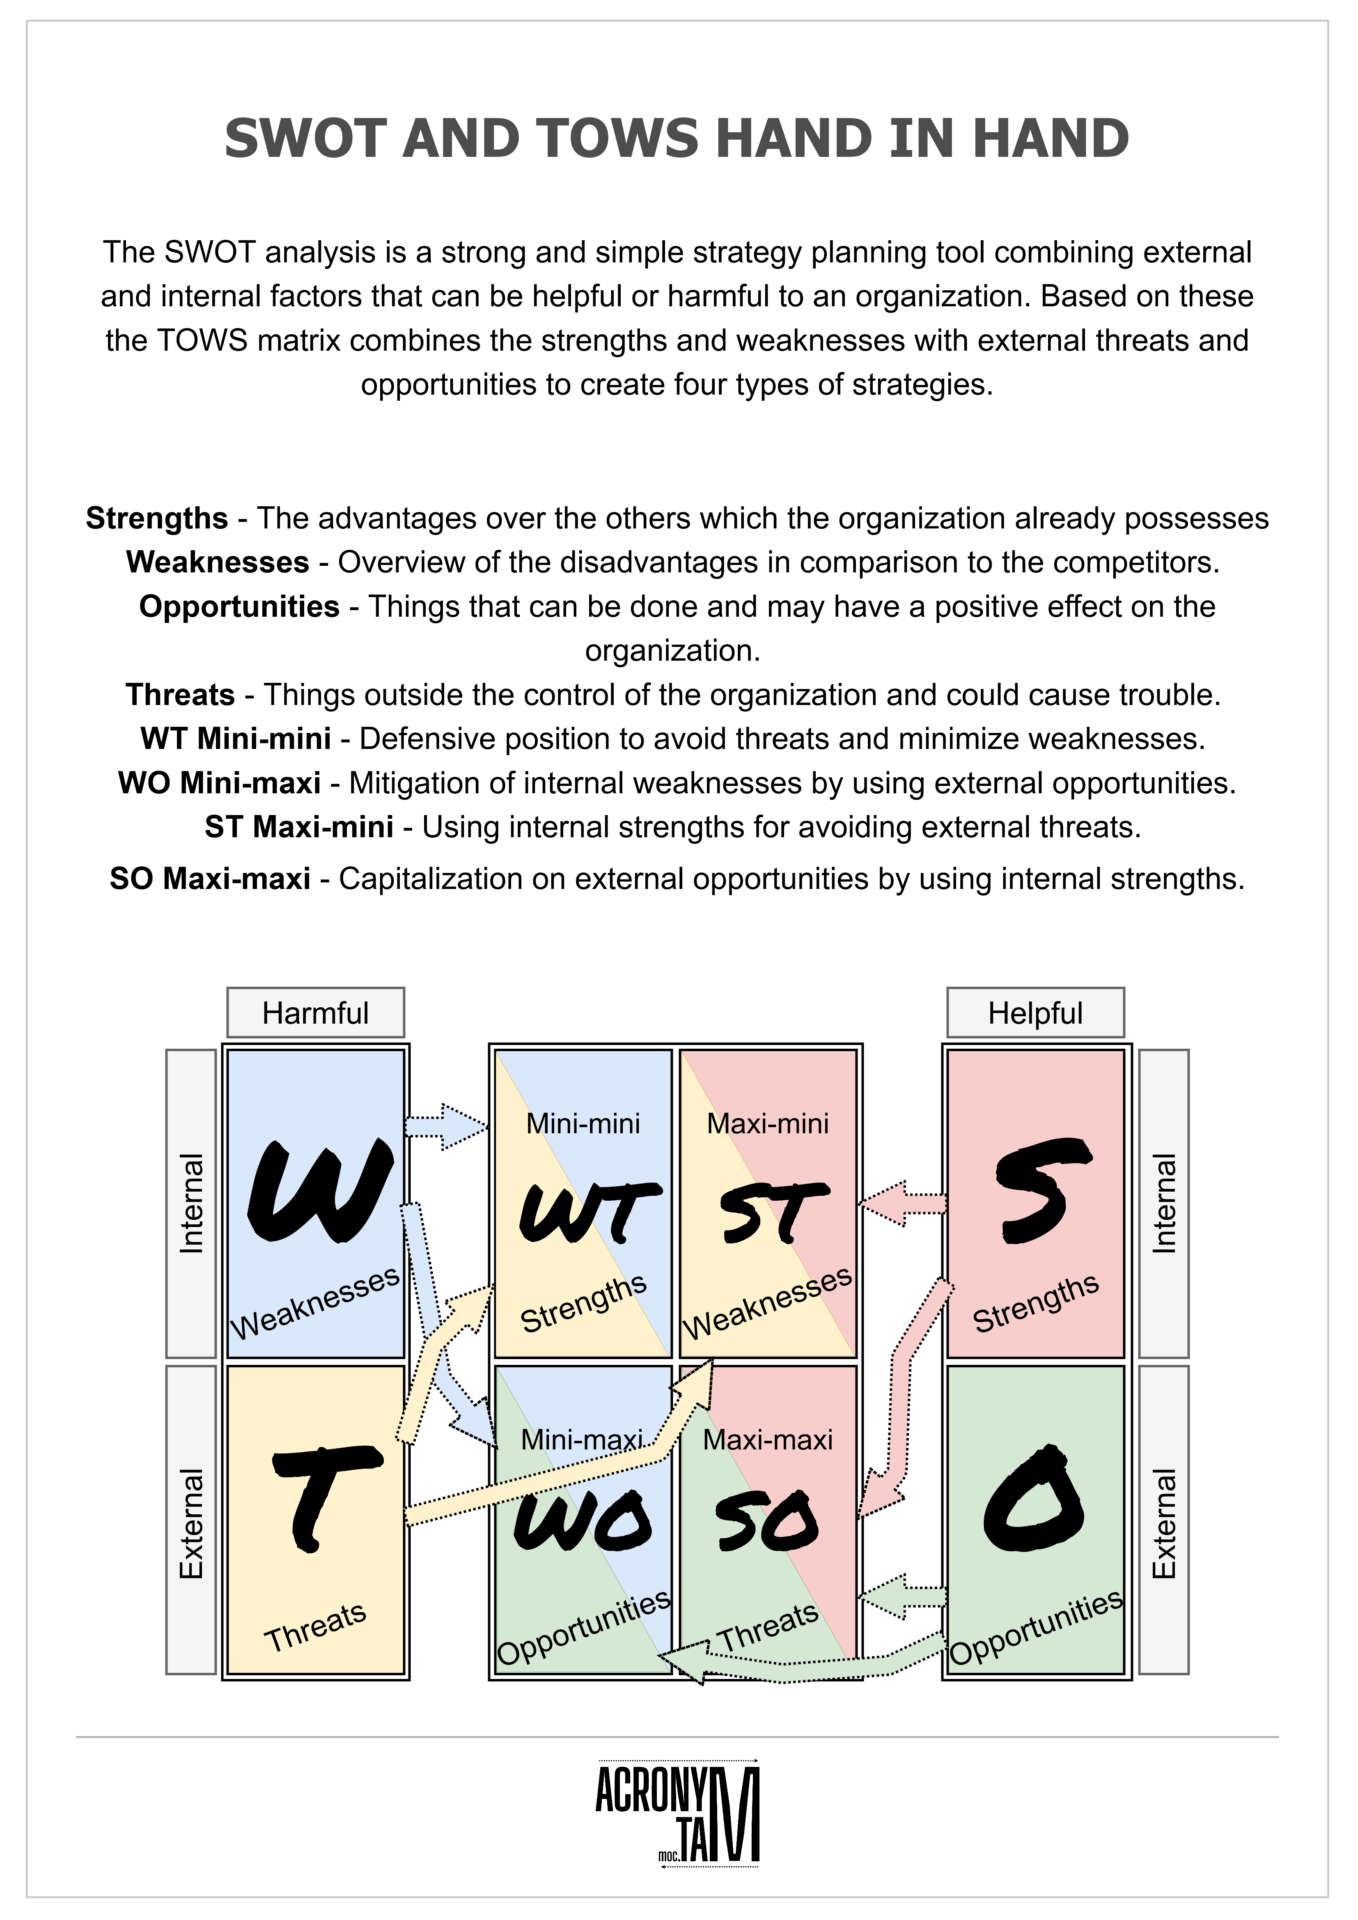 SWOT and TOWS Analysis